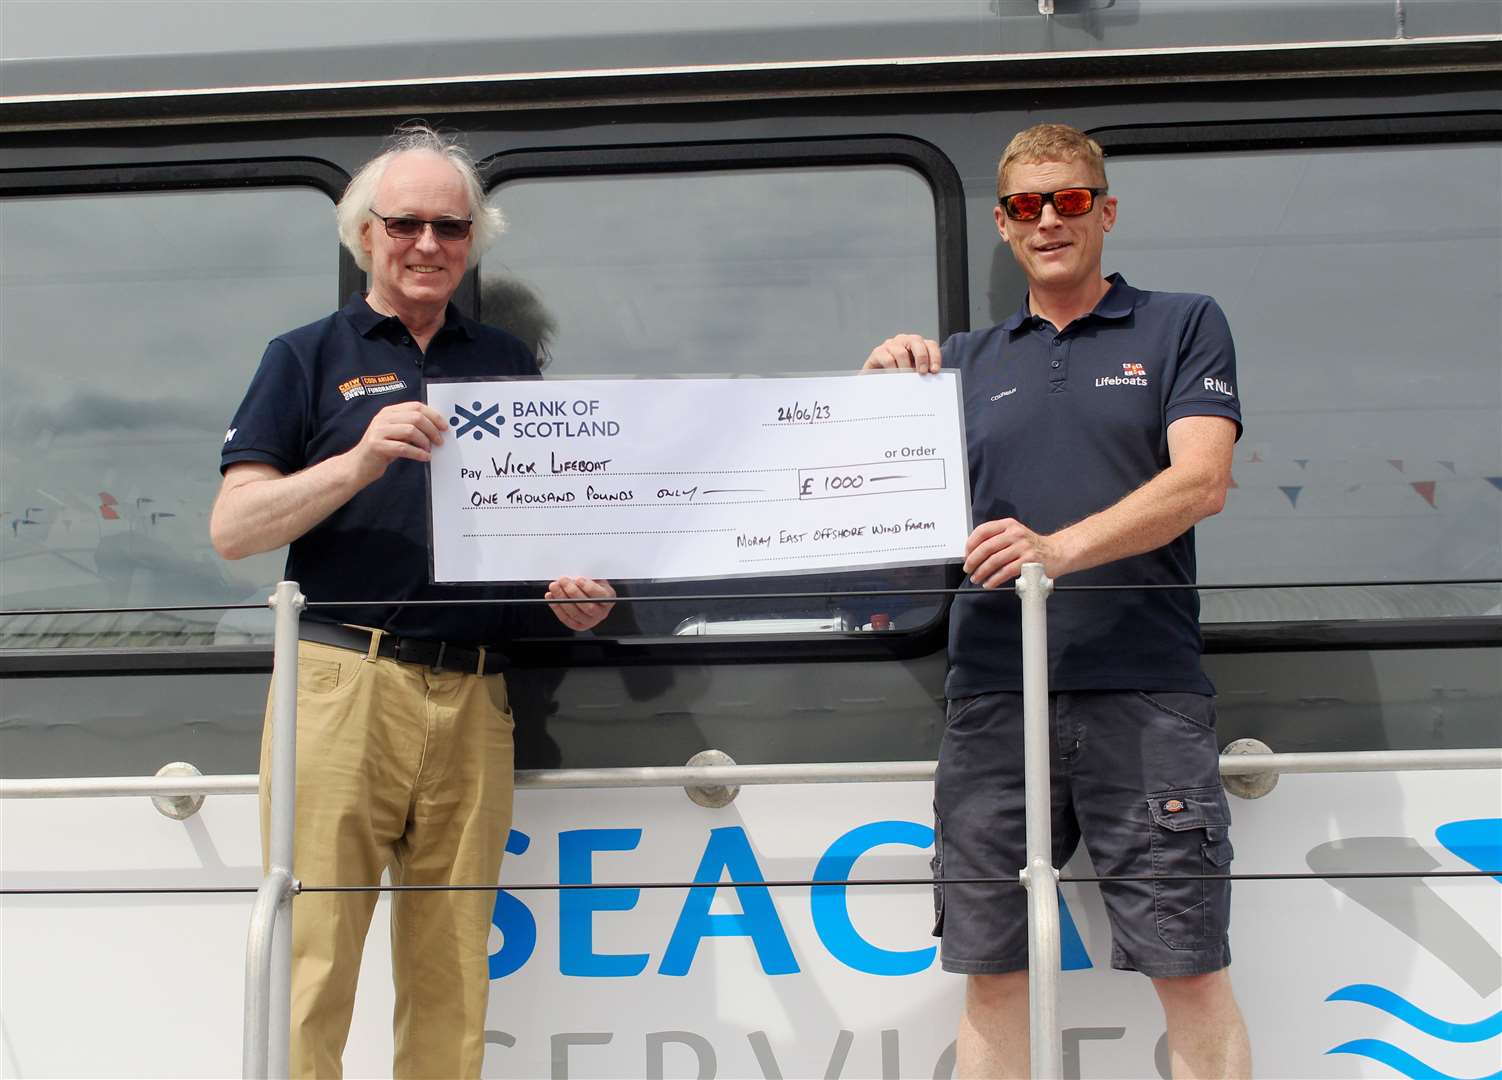 Murray Lamont, chairman of the Wick lifeboat management committee, and Allan Lipp, coxswain, with a £1000 cheque for Wick RNLI from Moray East offshore wind farm. Picture: Alan Hendry